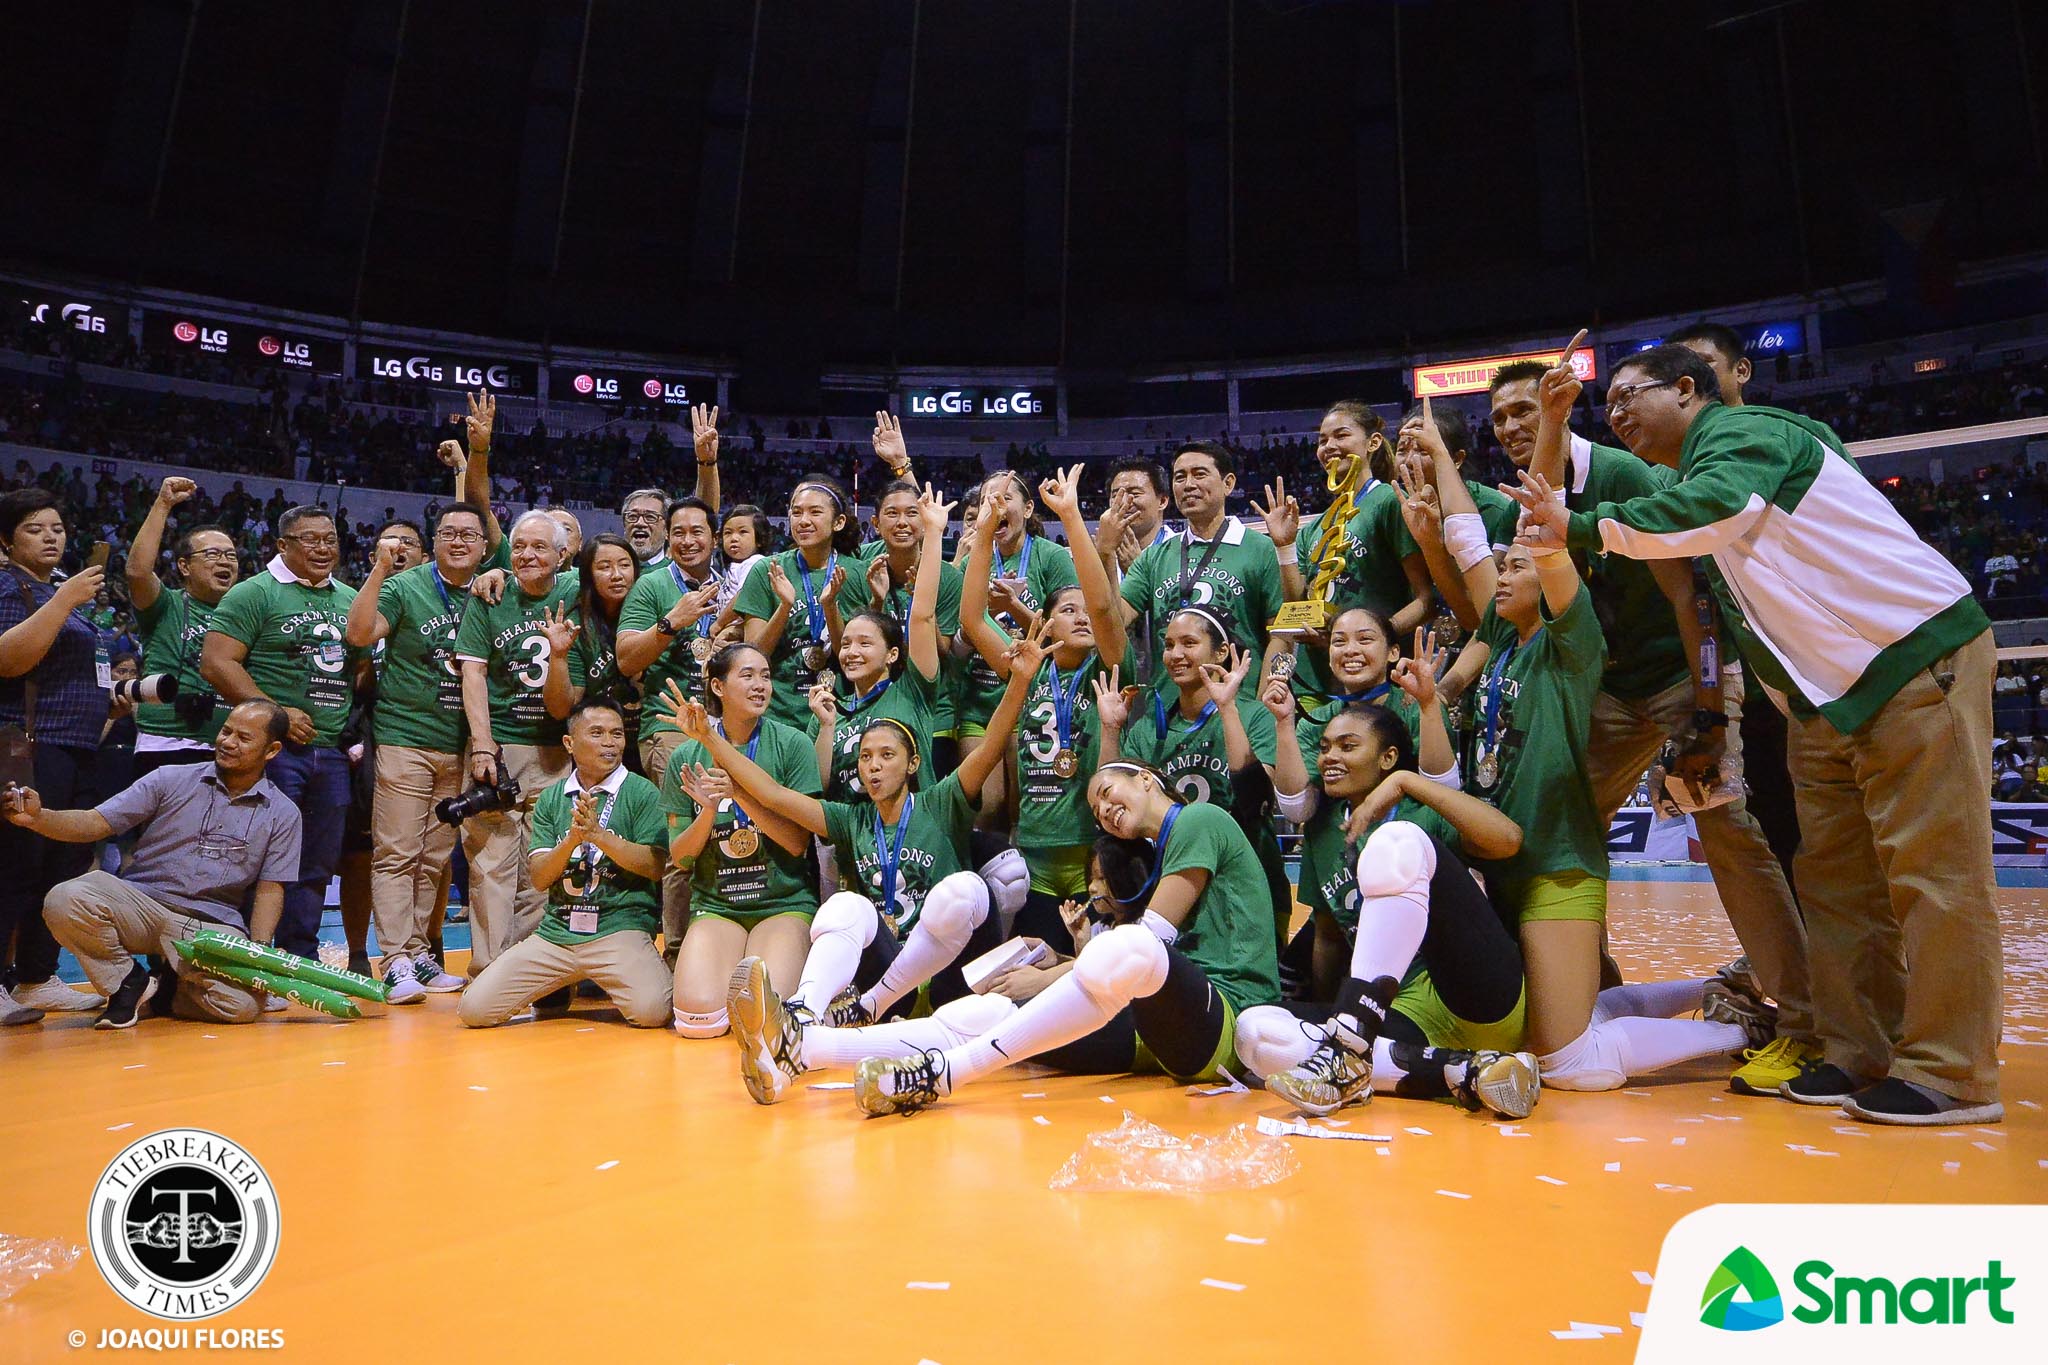 UAAP-80-Volleyball-DLSU-vs.-FEU-DLSU-champion-9526 From 'pambarangay' to 'pang-three-peat', Ramil de Jesus relishes in another tough road to a championship DLSU News UAAP Volleyball  - philippine sports news